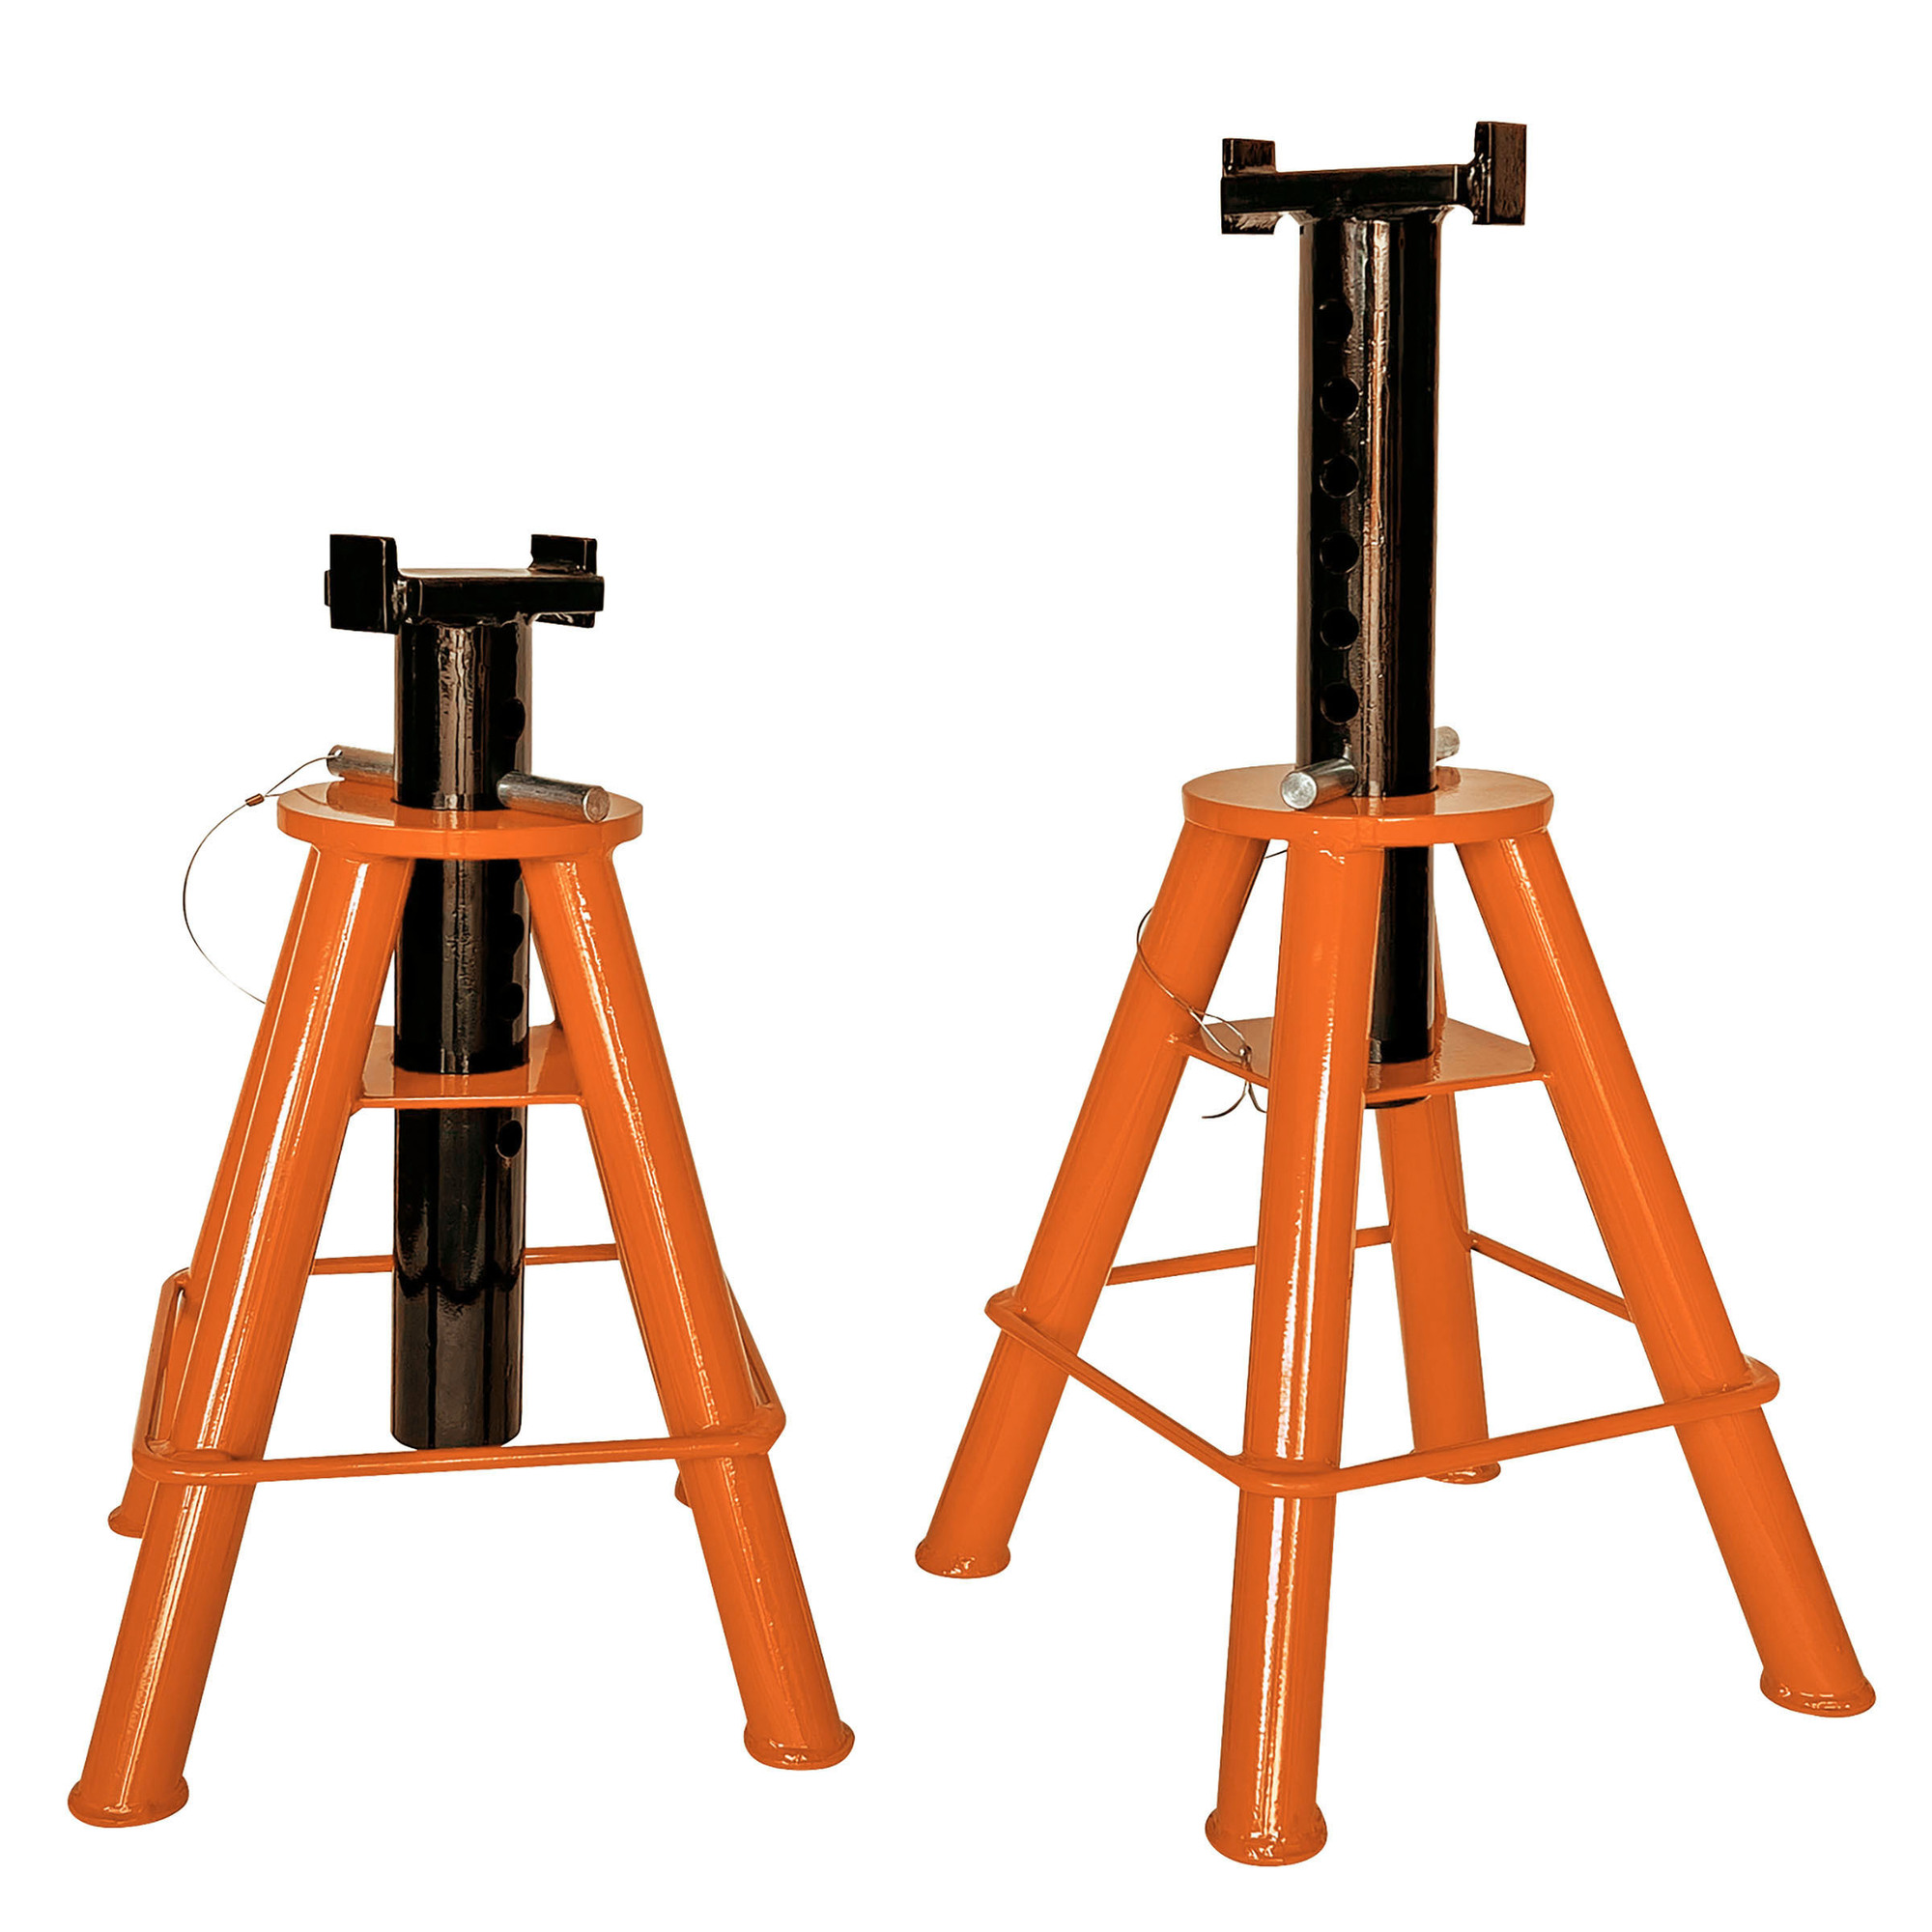 Buffalo Tools, 10 Ton Medium Height Jack Stand Set (2pk), Lift Capacity 10 Tons, Max. Lift Height 31.5 in, MInch Lift Height 20.5 in, Model JS10MSET